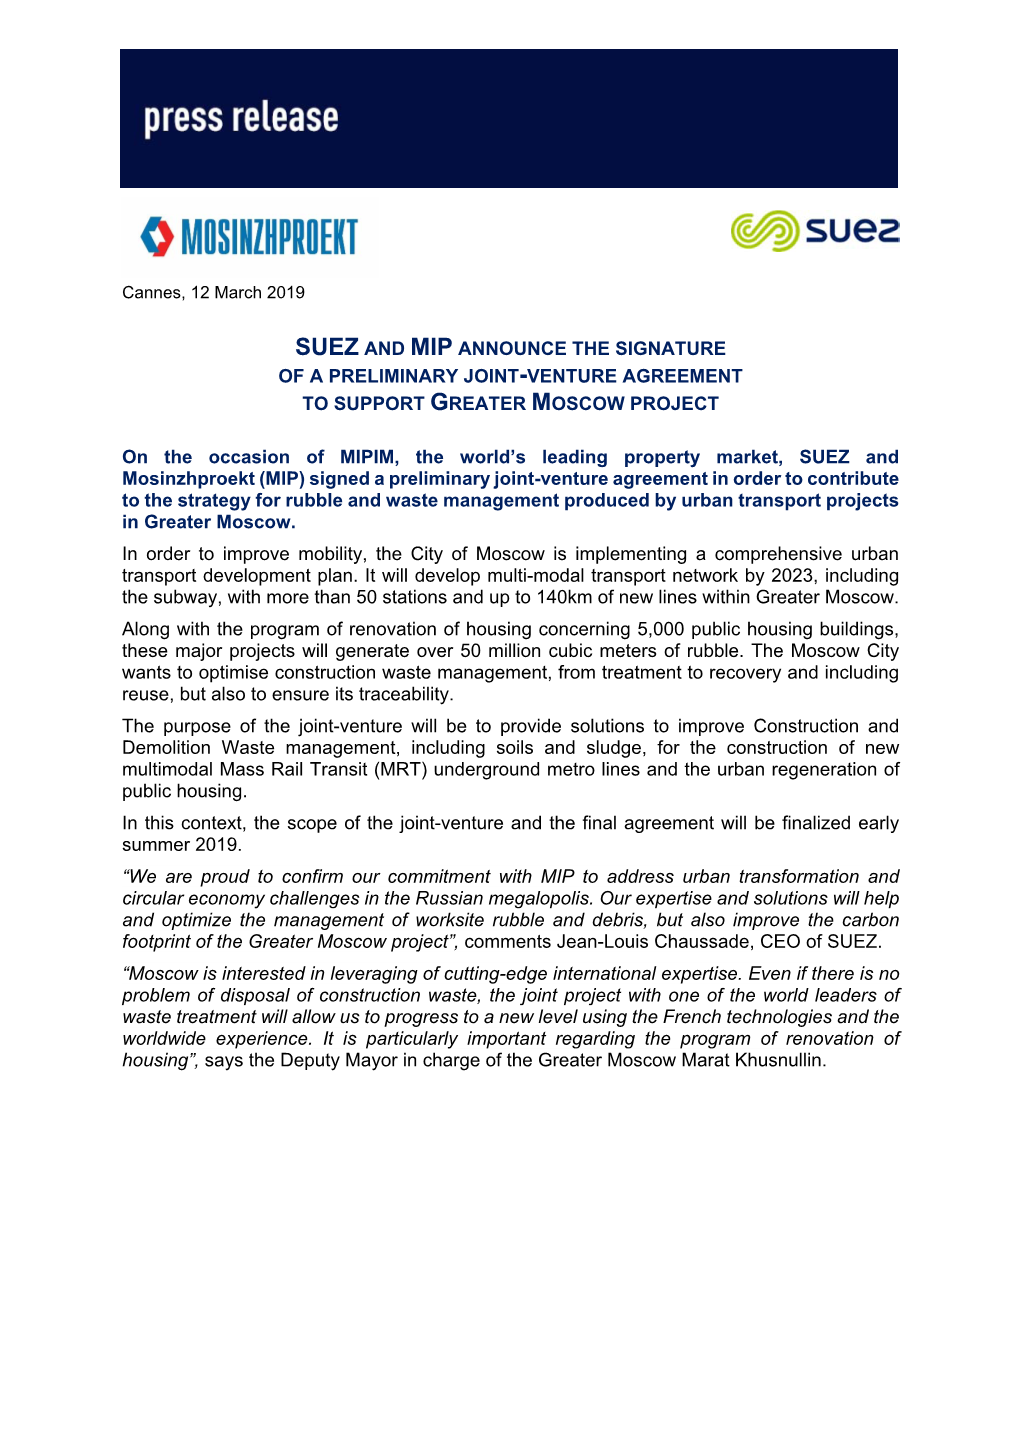 Suez and Mip Announce the Signature of a Preliminary Joint-Venture Agreement to Support Greater Moscow Project